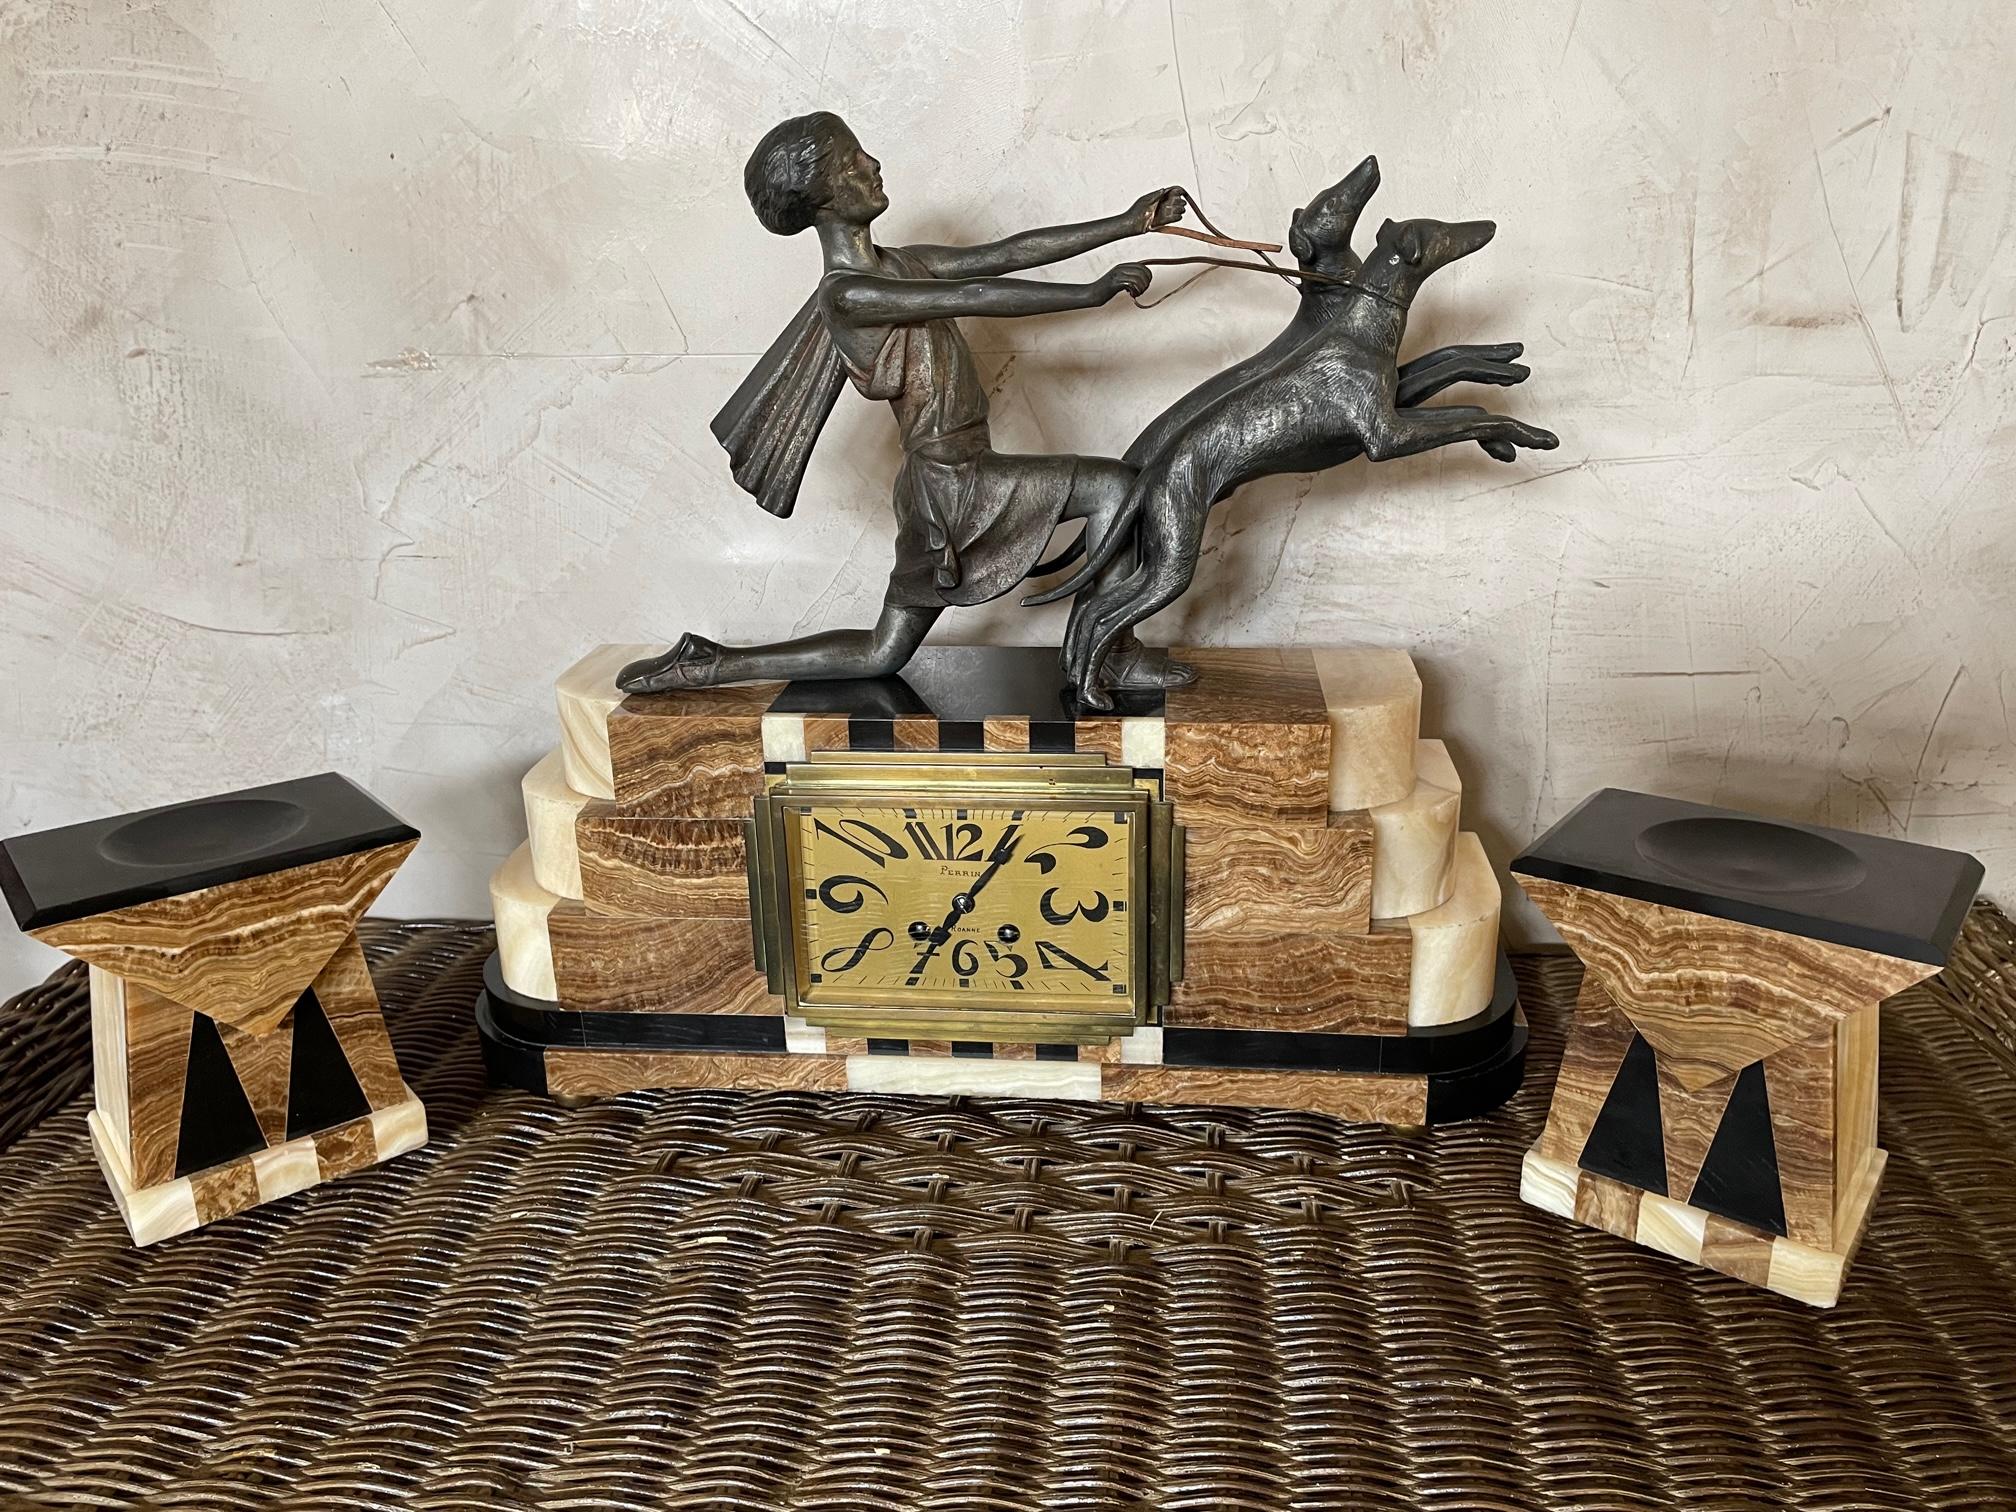 Exceptionnal Art deco Mantel clock in marble and brass representing a women with her two dogs on a leash. 
Clock movement by Perrin (Roanne, France). 
Two marble candle holder. 
Very good condition and quality.
 